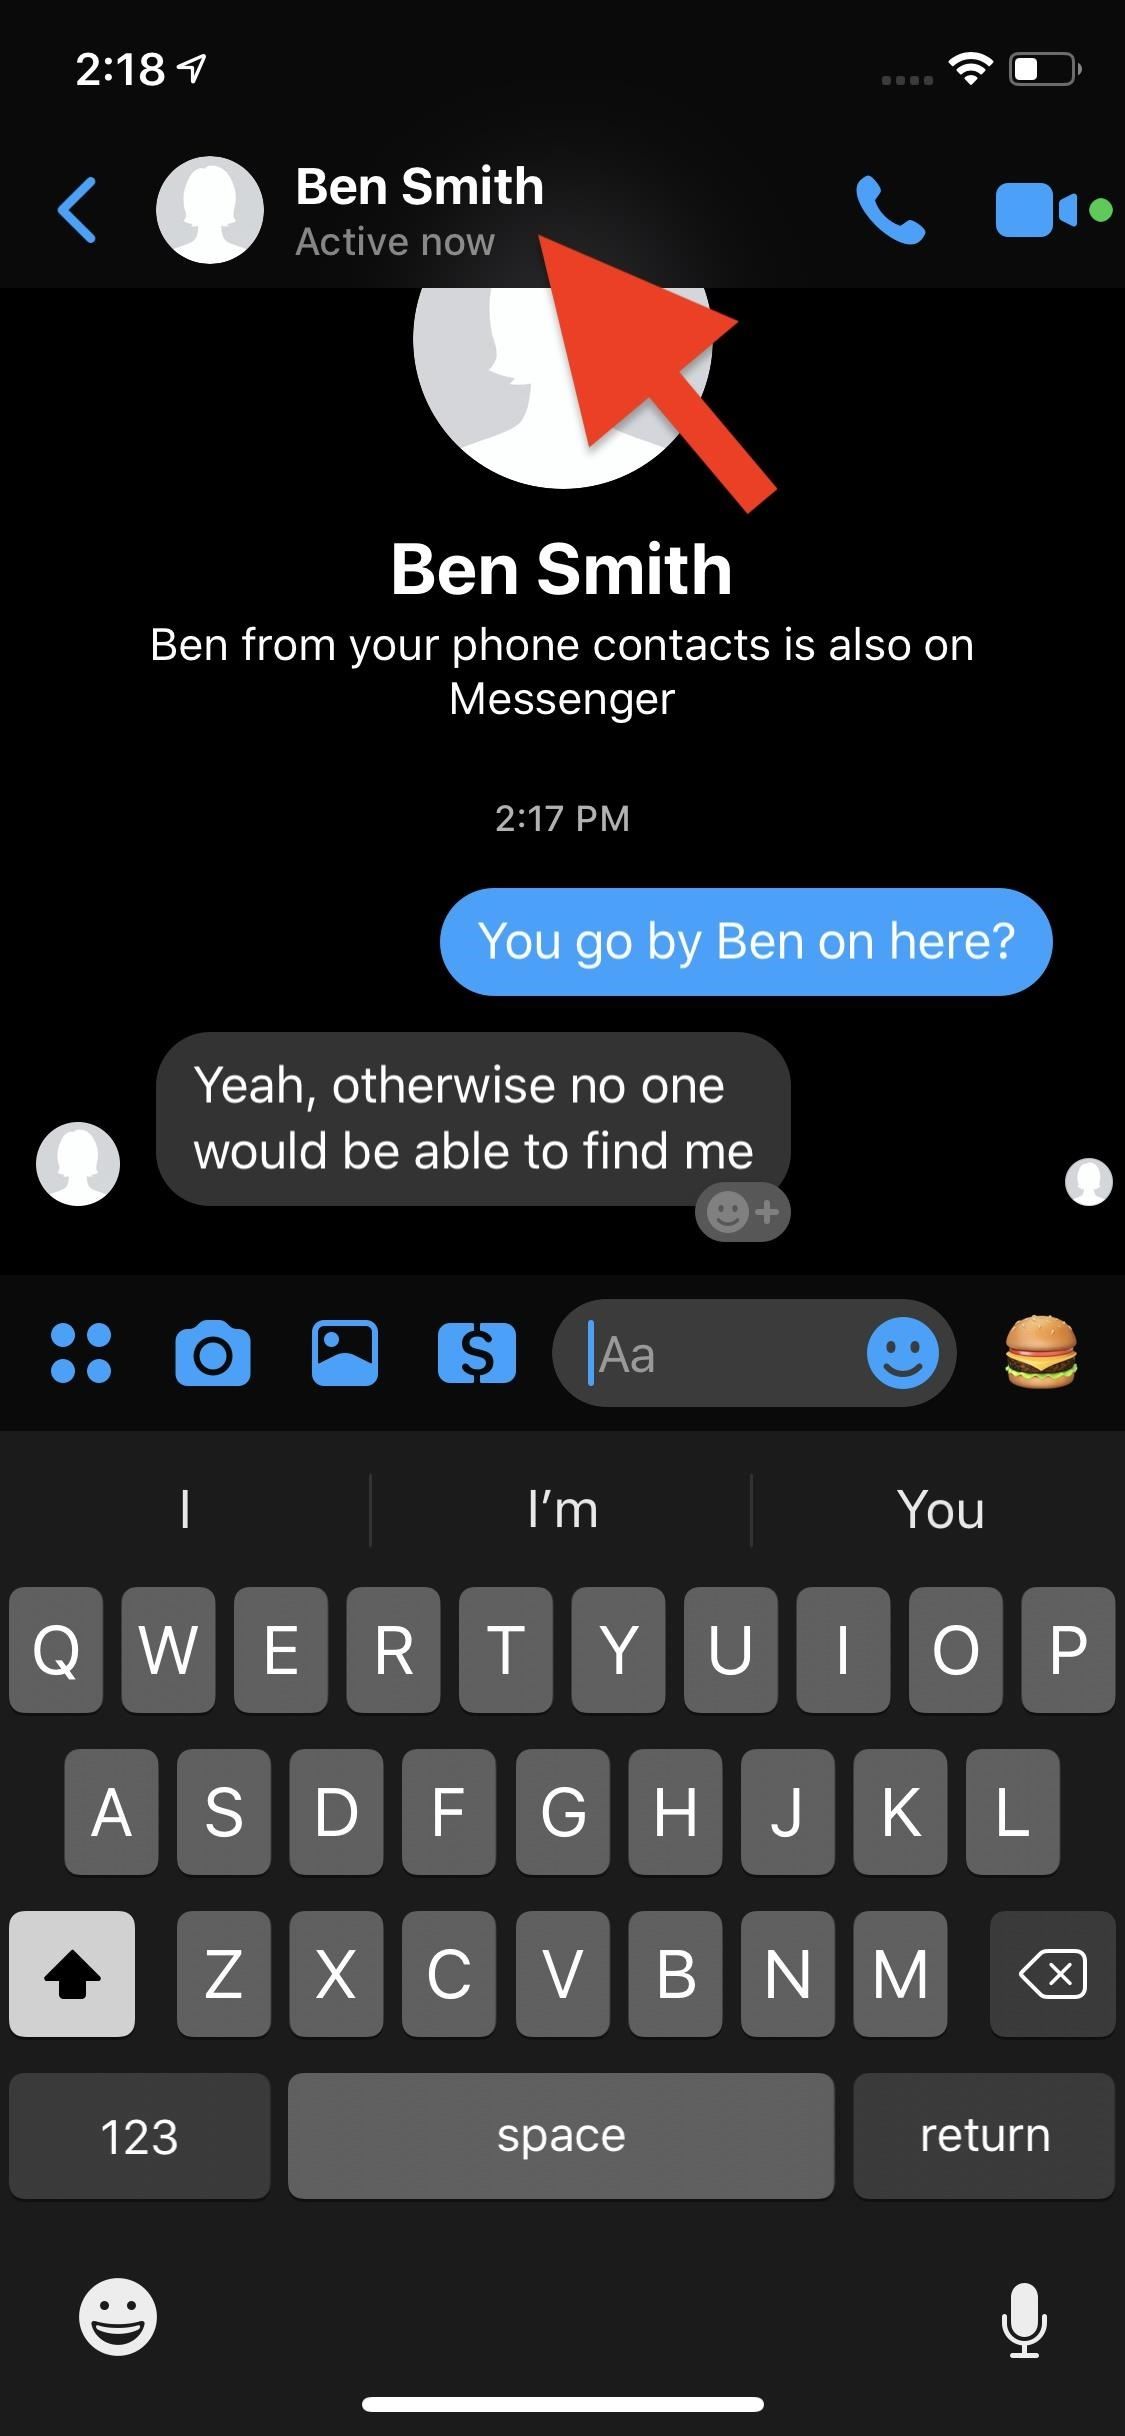 How to Set & Remove Nicknames in Facebook Messenger Chats for More Personalized Conversations